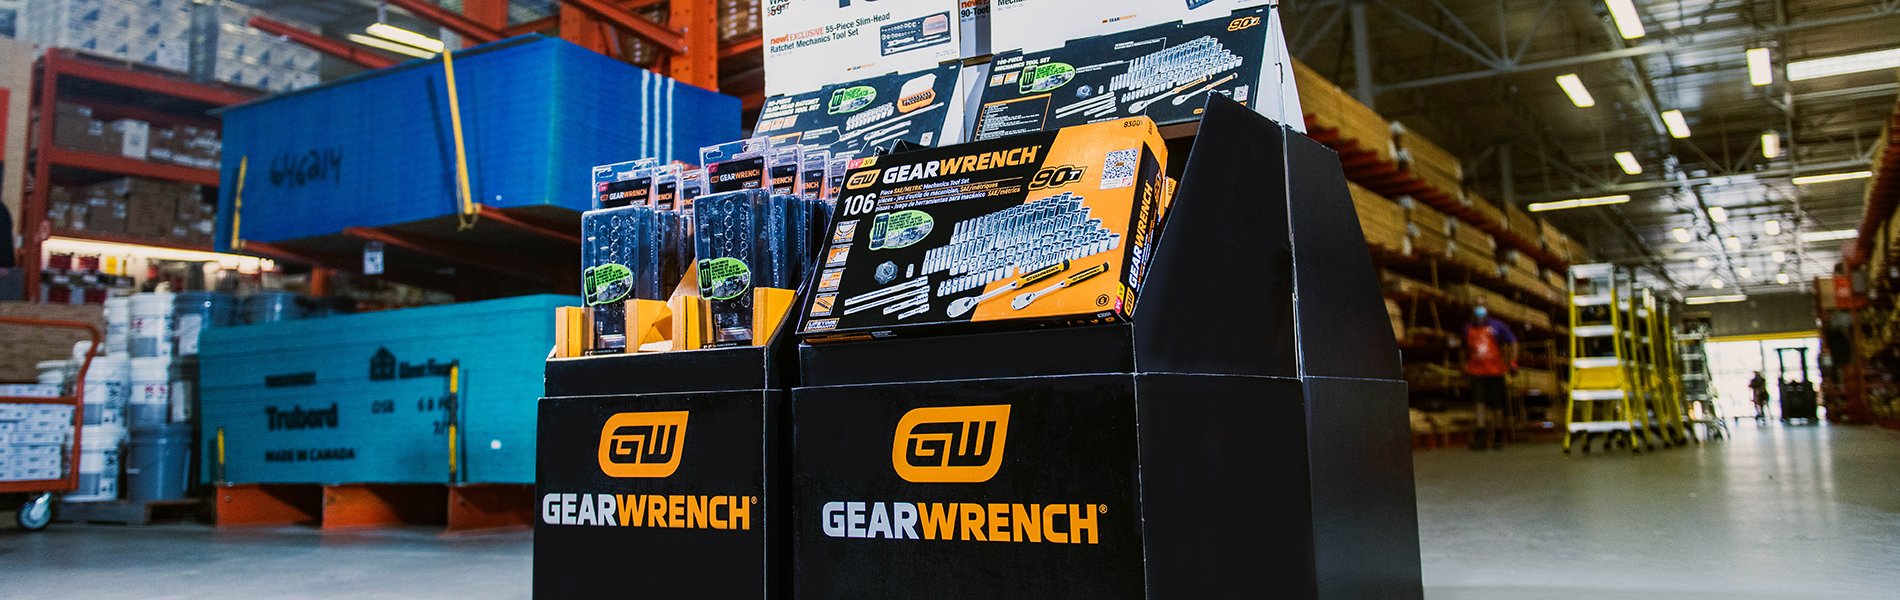 GEARWRENCH banner